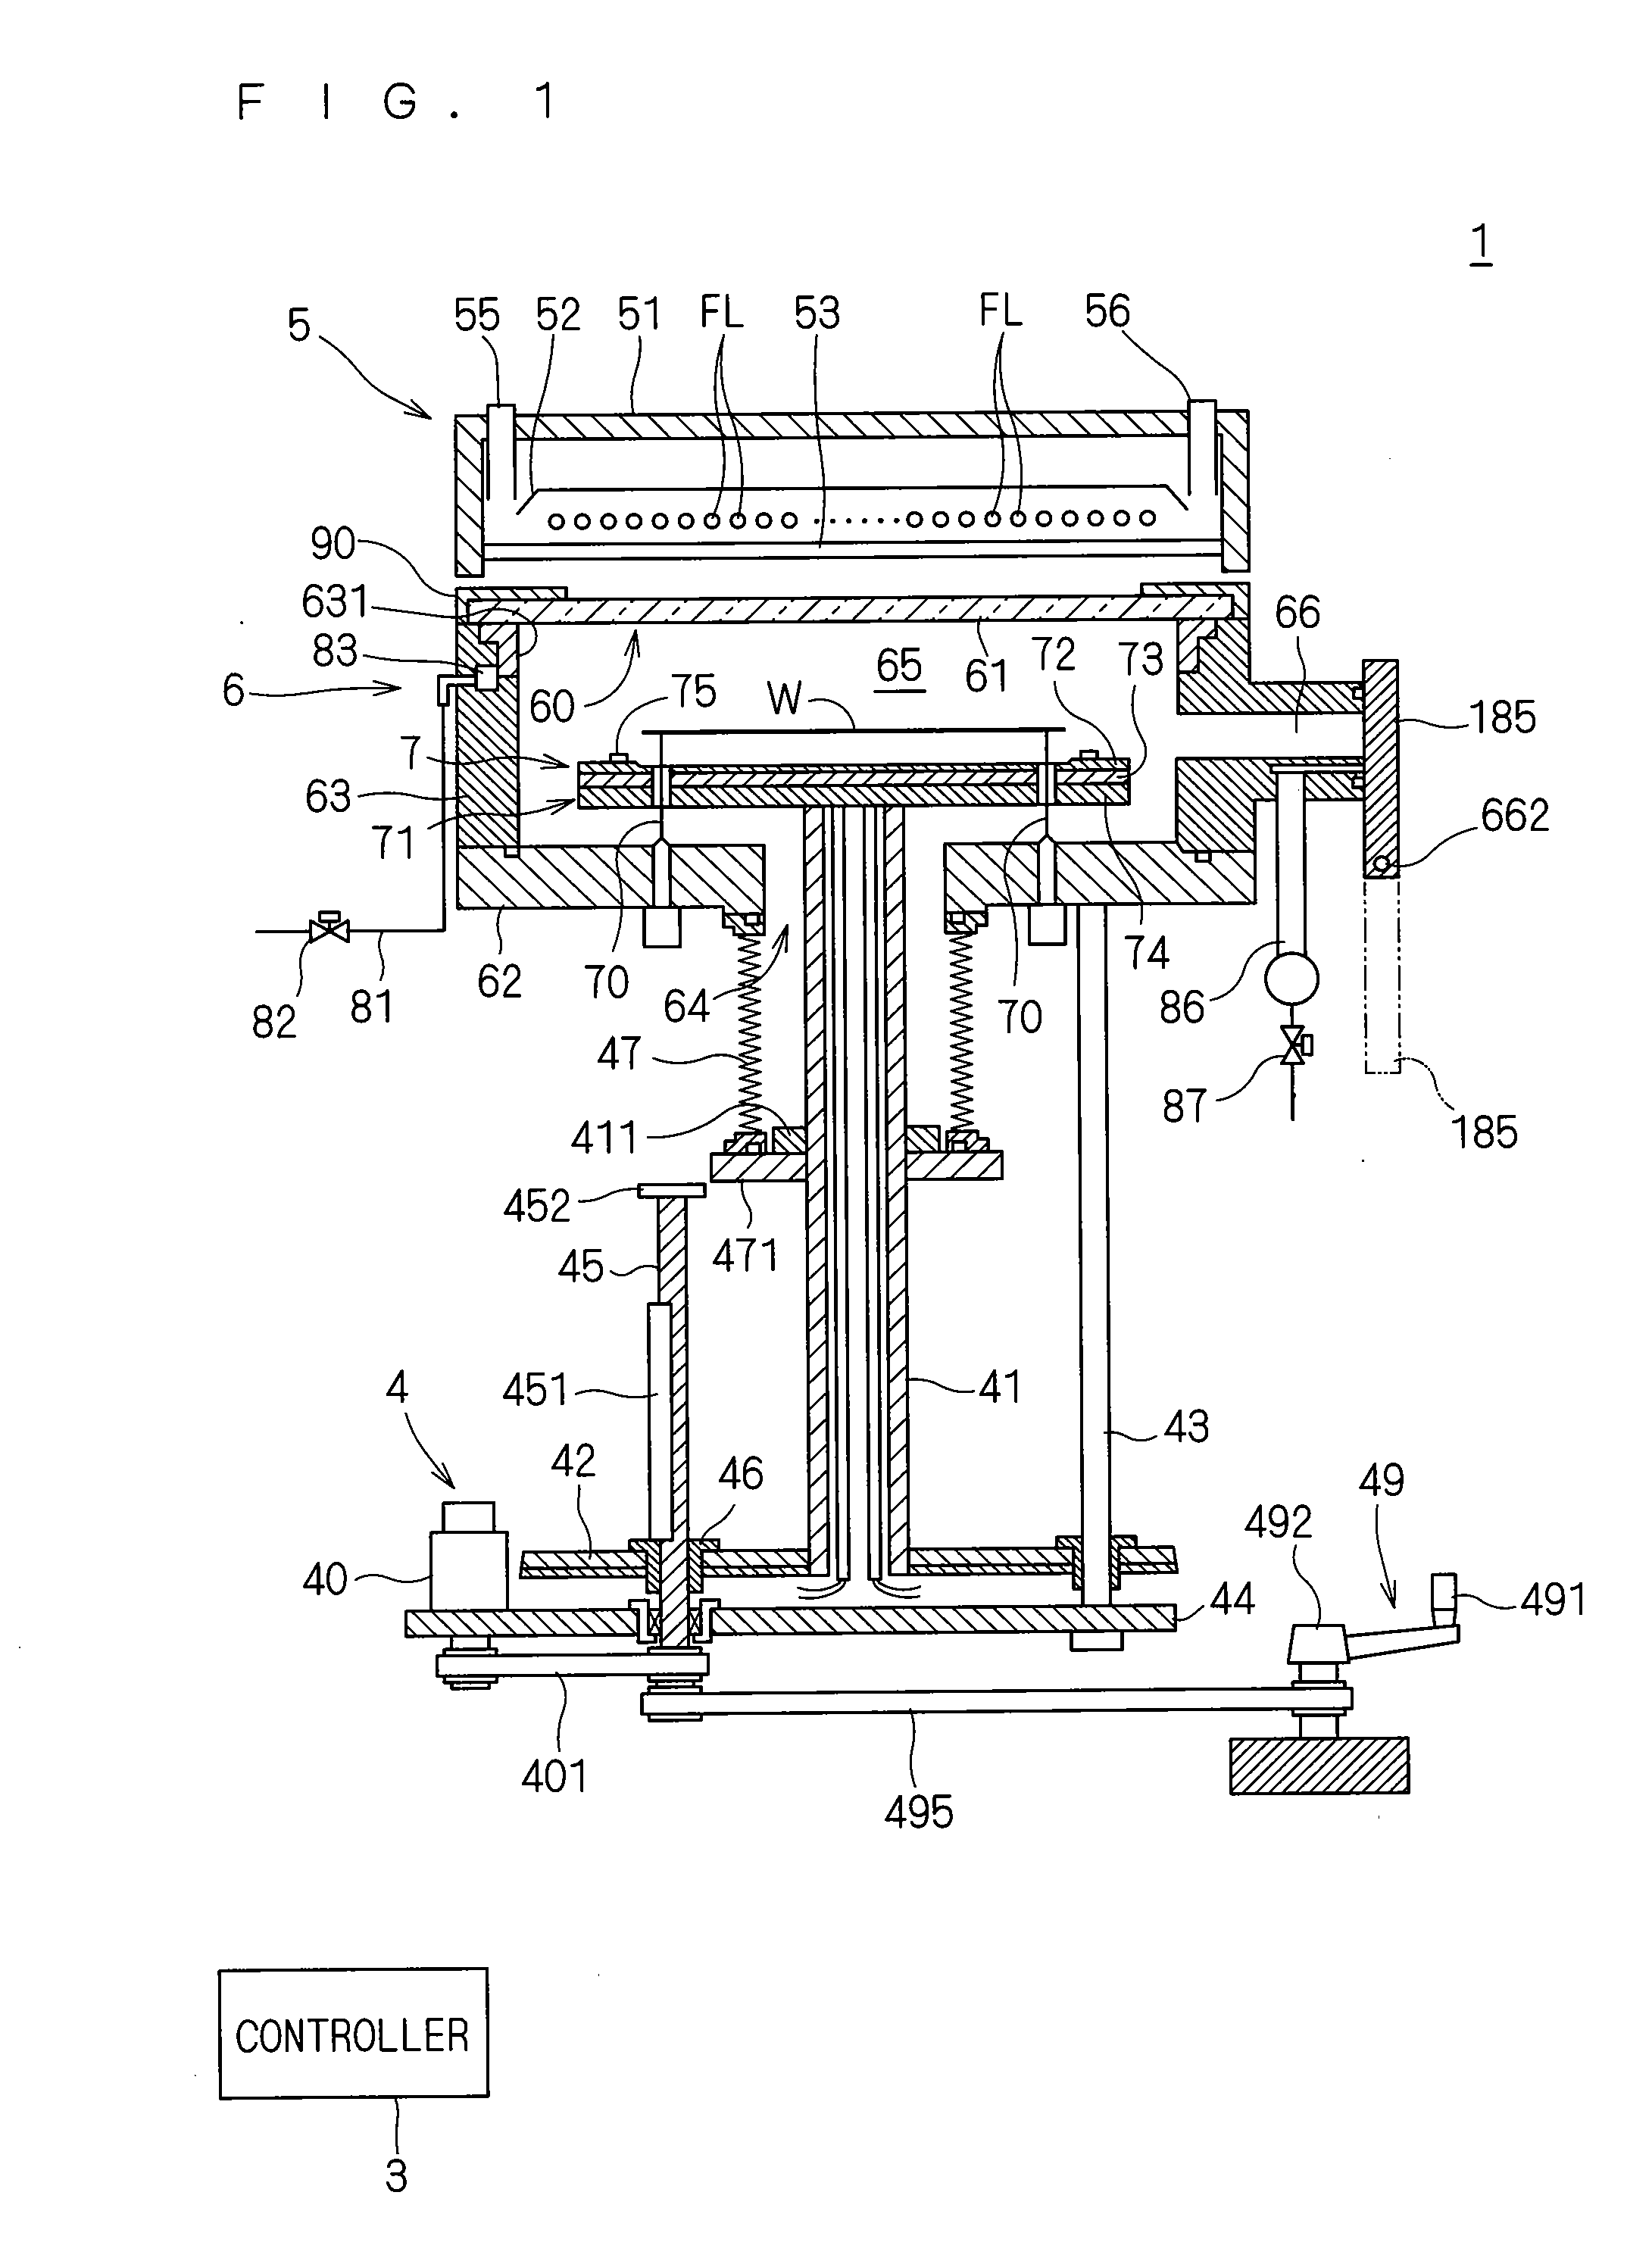 Heat treatment apparatus heating substrate by irradiation with light